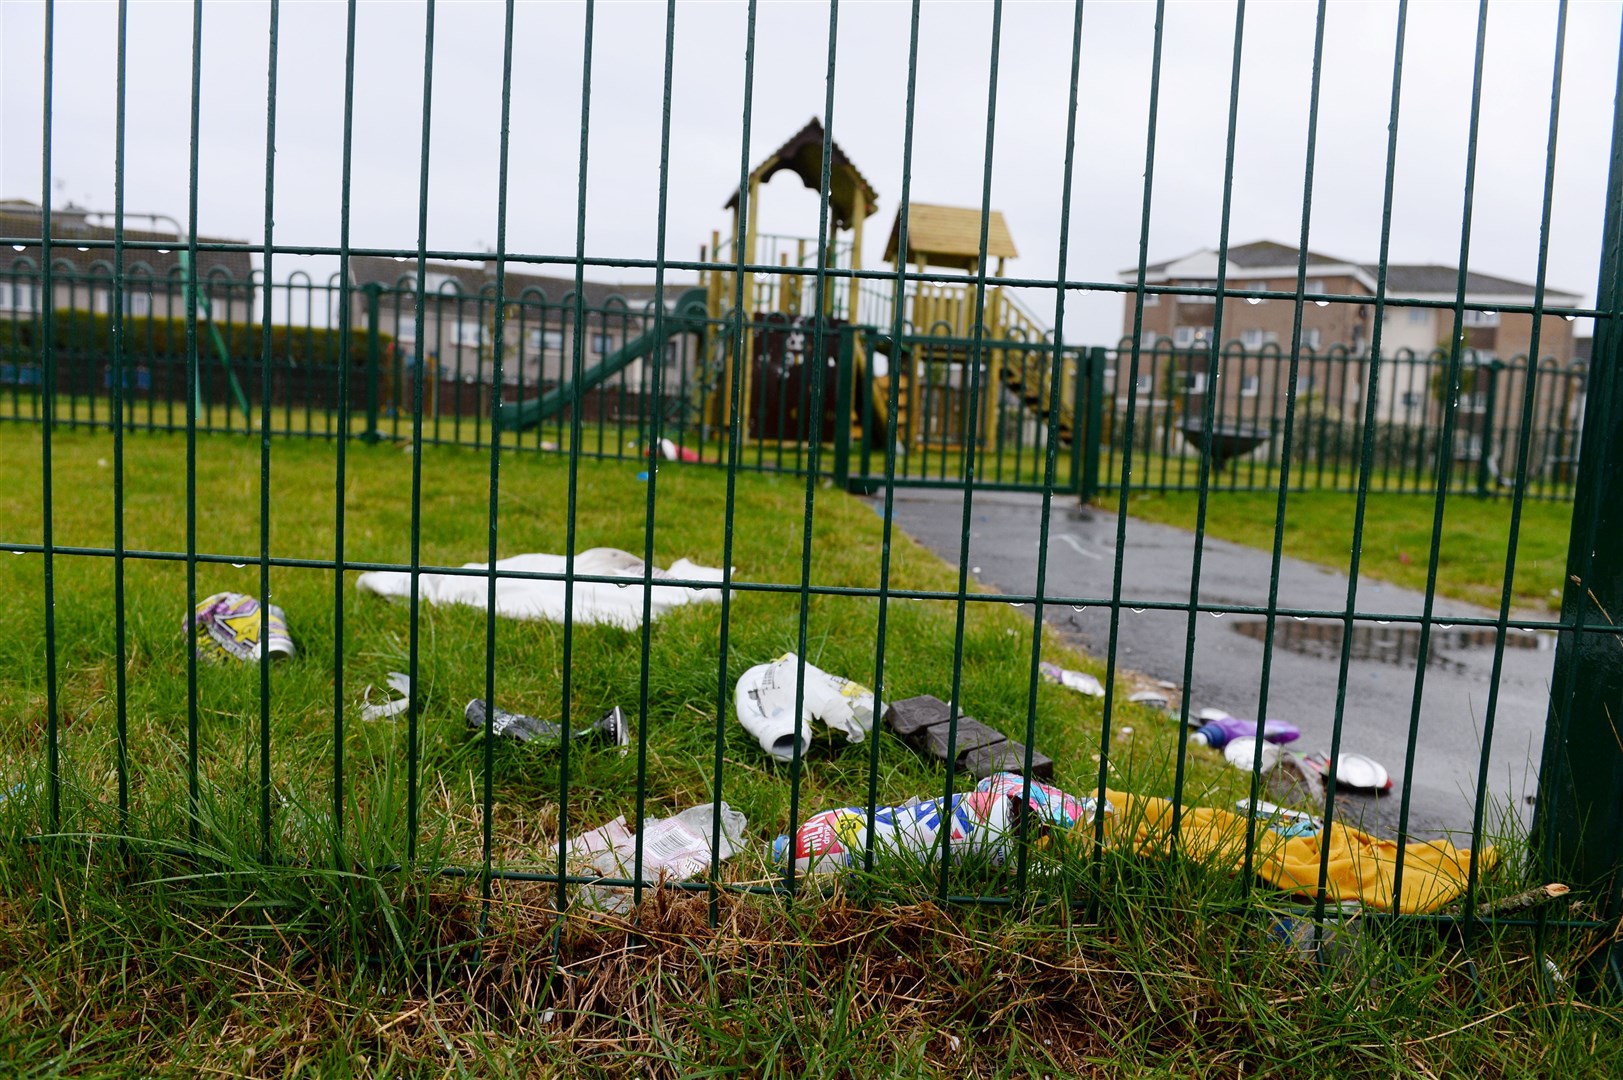 Benula play area in Inverness was padlocked after vandalism in October. Picture: Gary Anthony